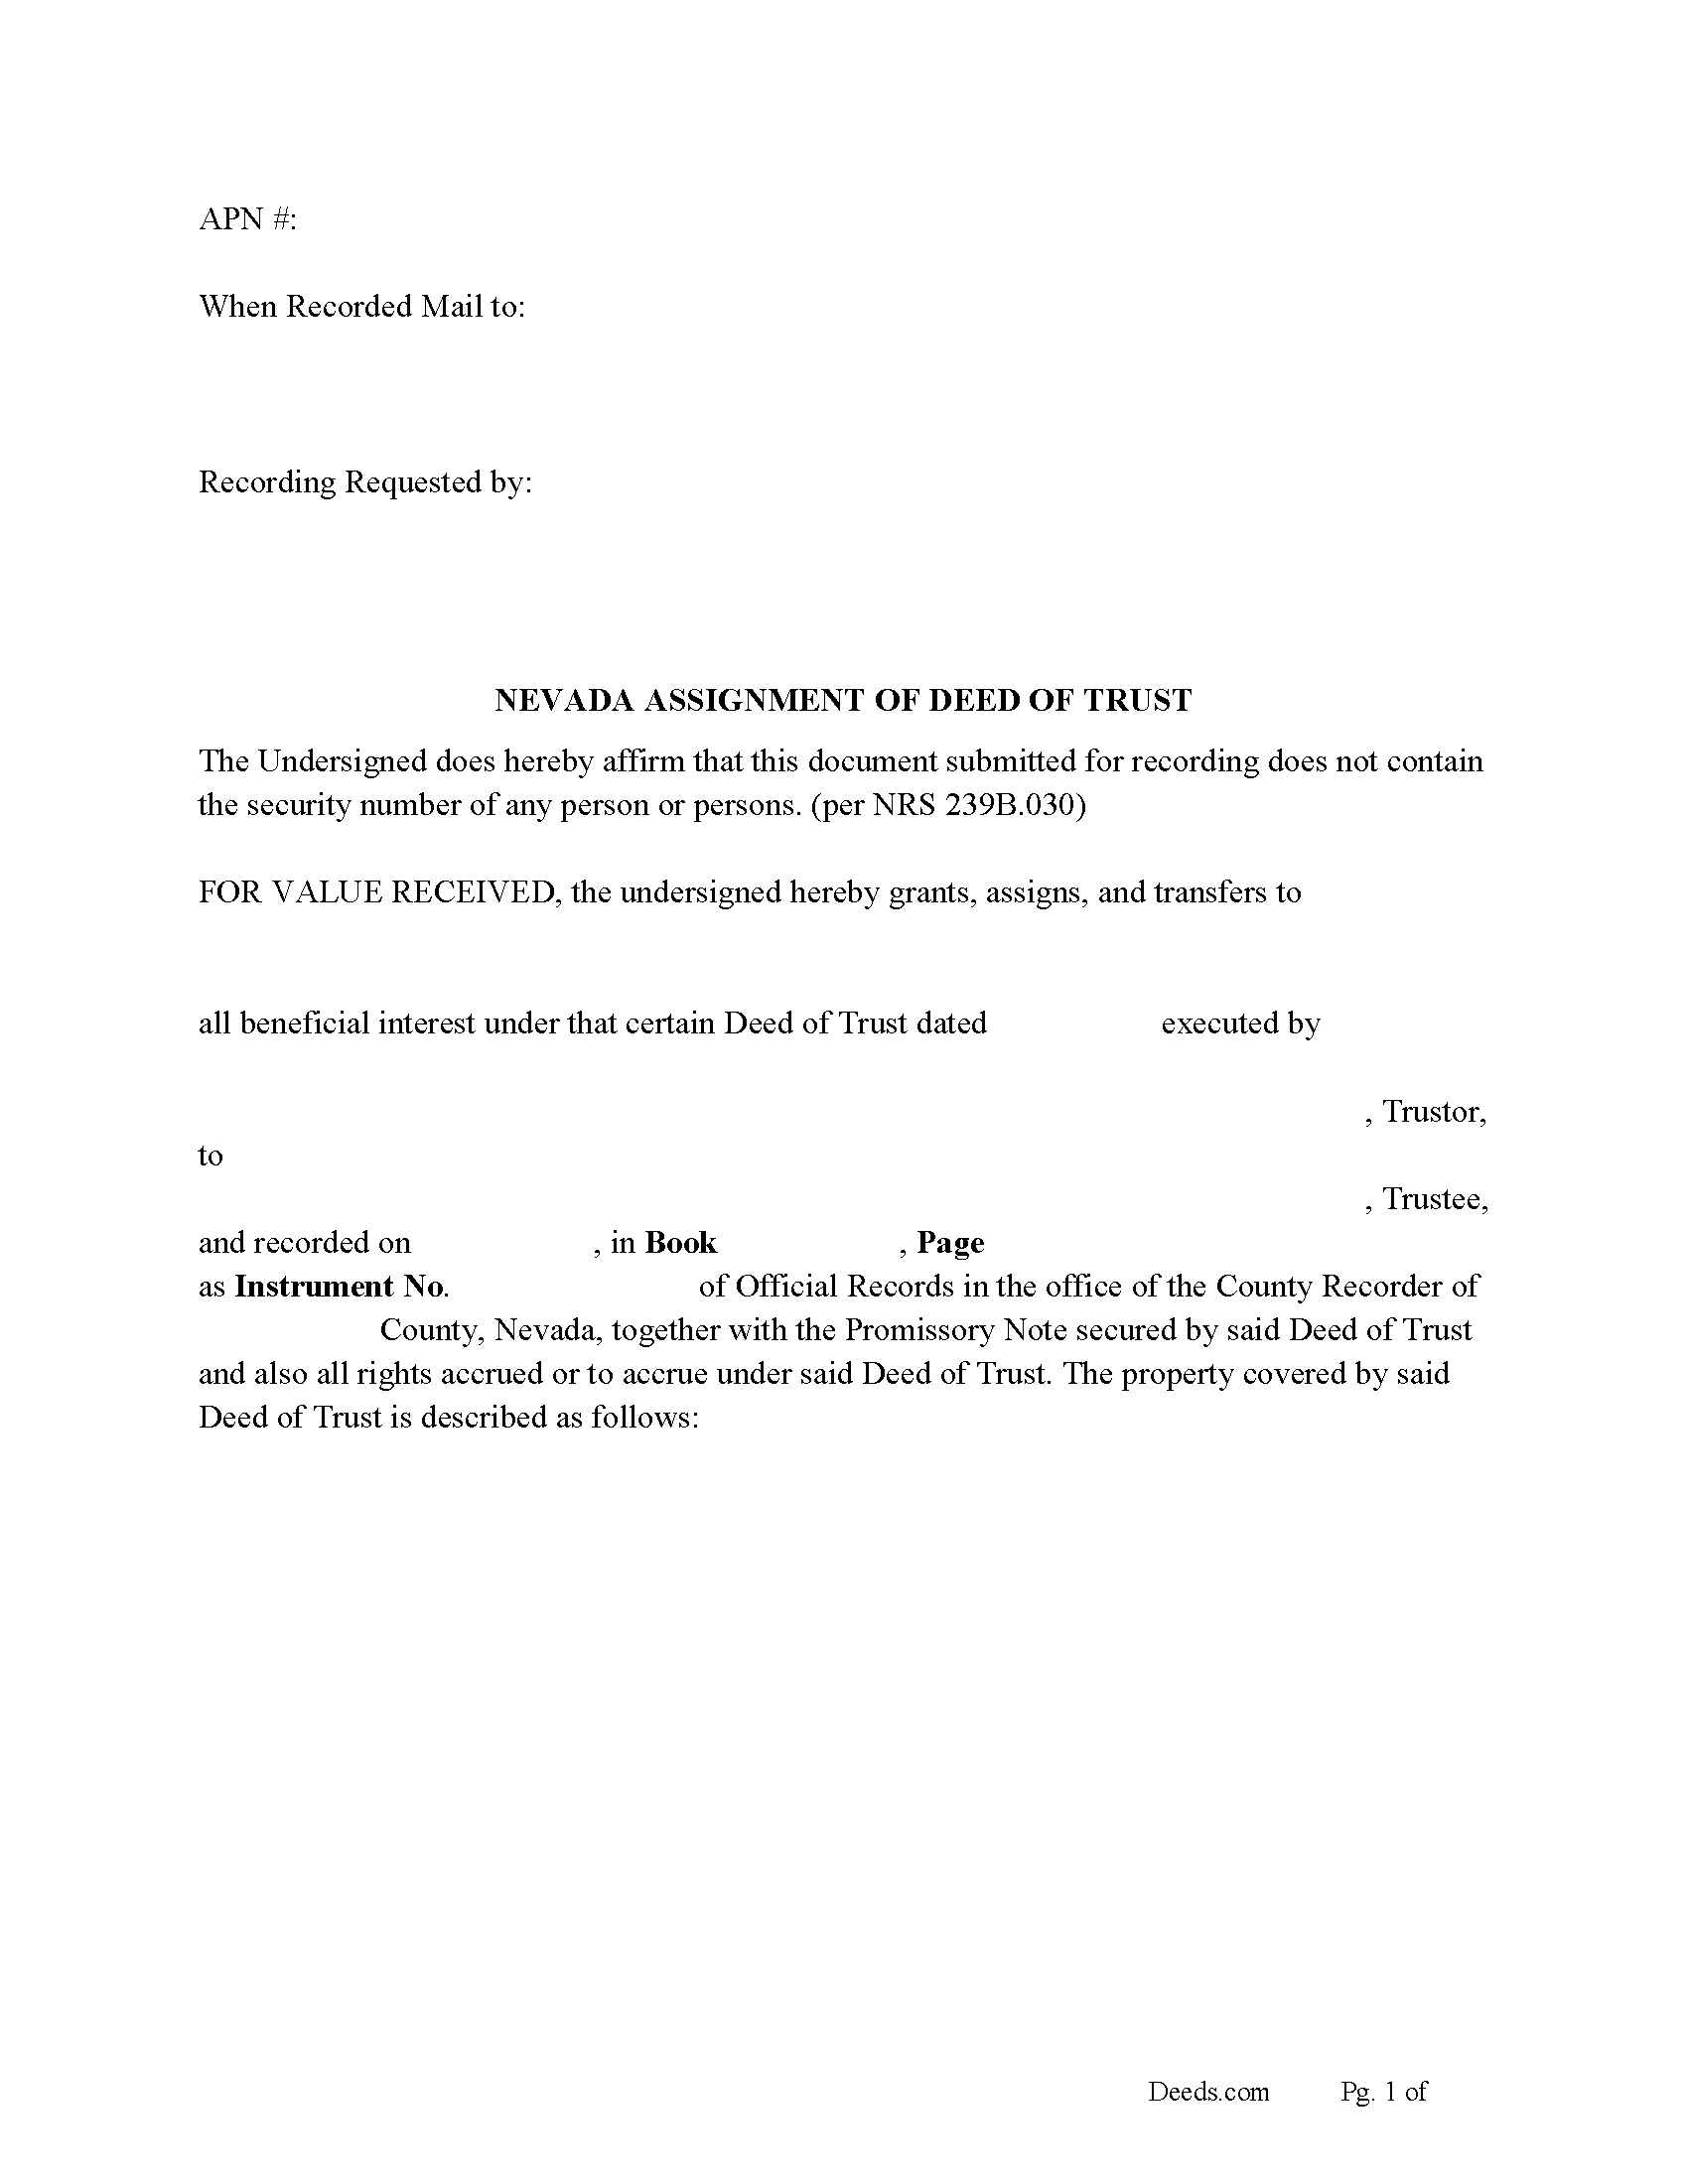 Nevada Assignment of Deed of Trust Image